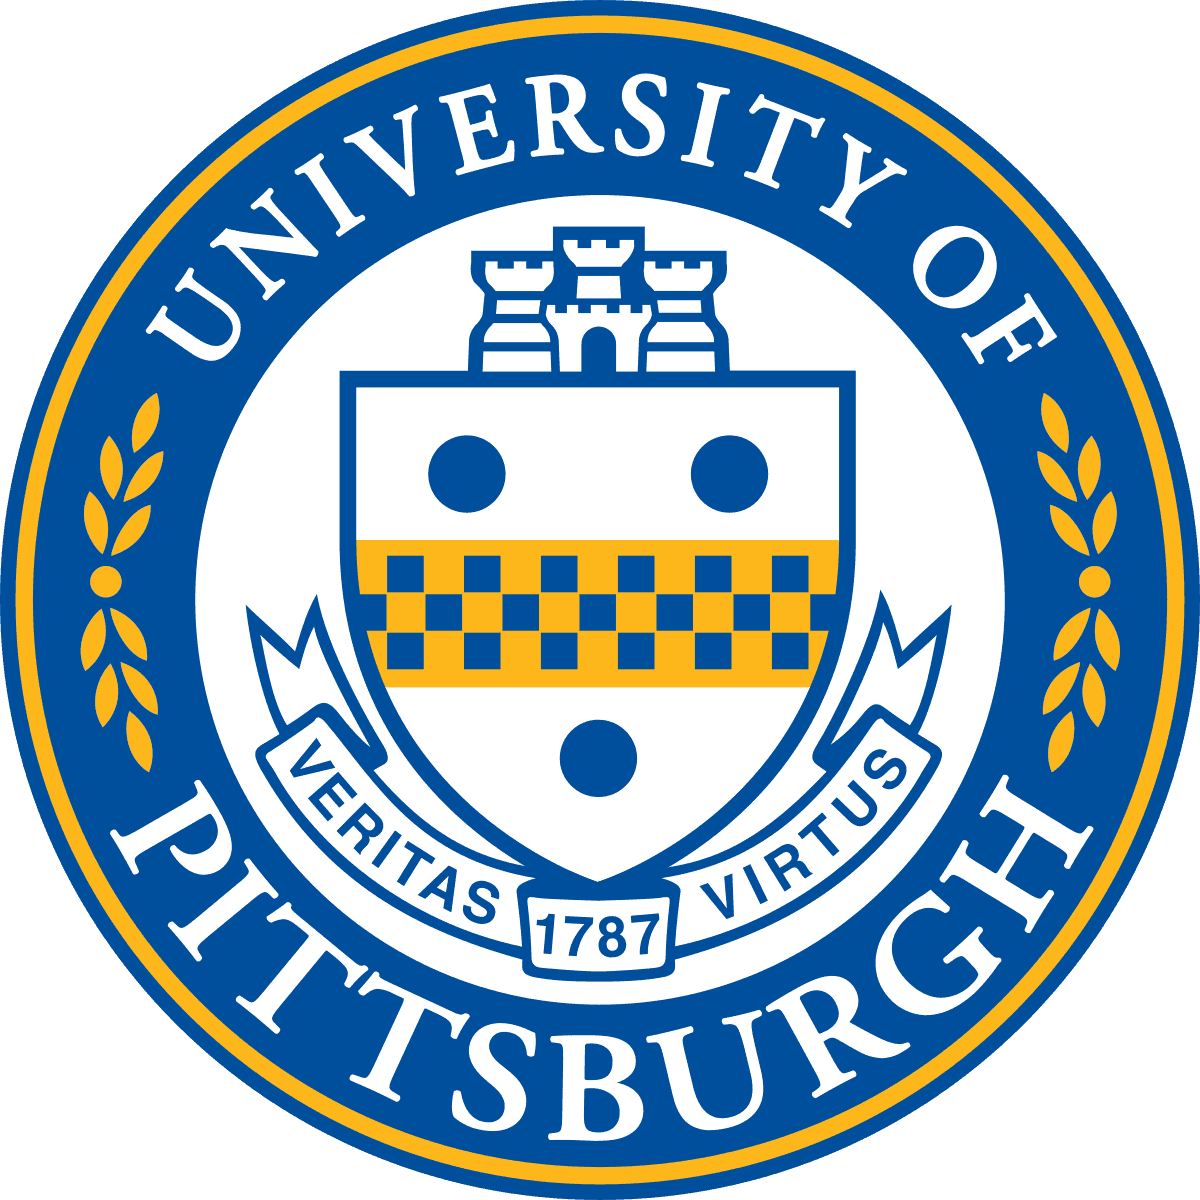 University_of_Pittsburgh_seal.svg.png